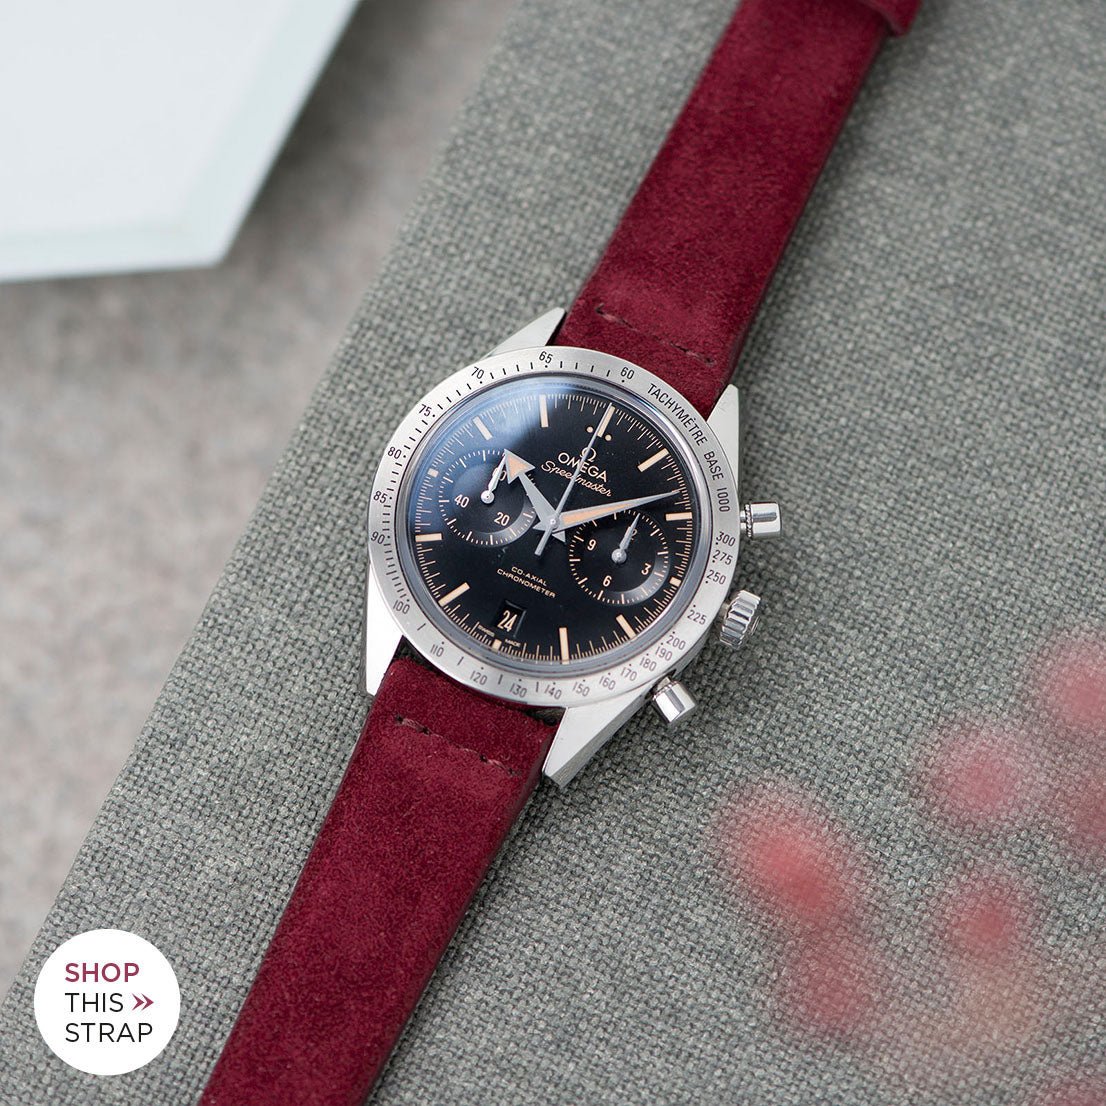 Bulang and Sons_Strap Guide_The Omega Speedmaster ’57 Co-Axial Chronograph_Burgundy Red Silky Suede Leather Watch Strap